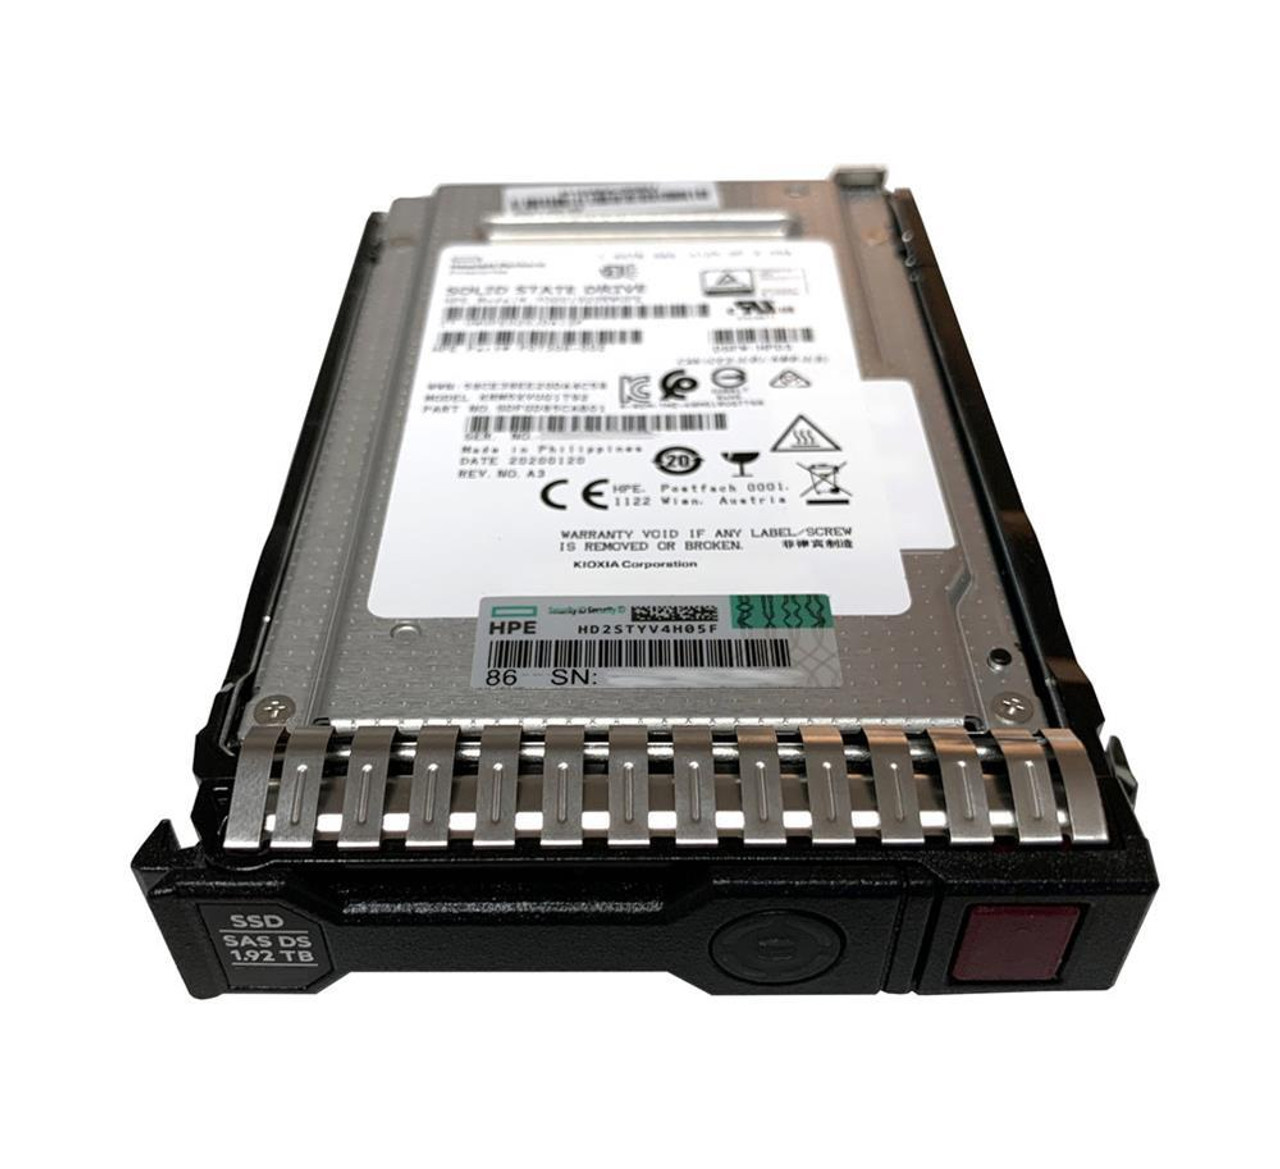 P07192-B21#0D1 HPE 1.92TB PCI Express x4 NVMe Read Intensive 2.5-inch Internal Solid State Drive (SSD) with Smart Carrier